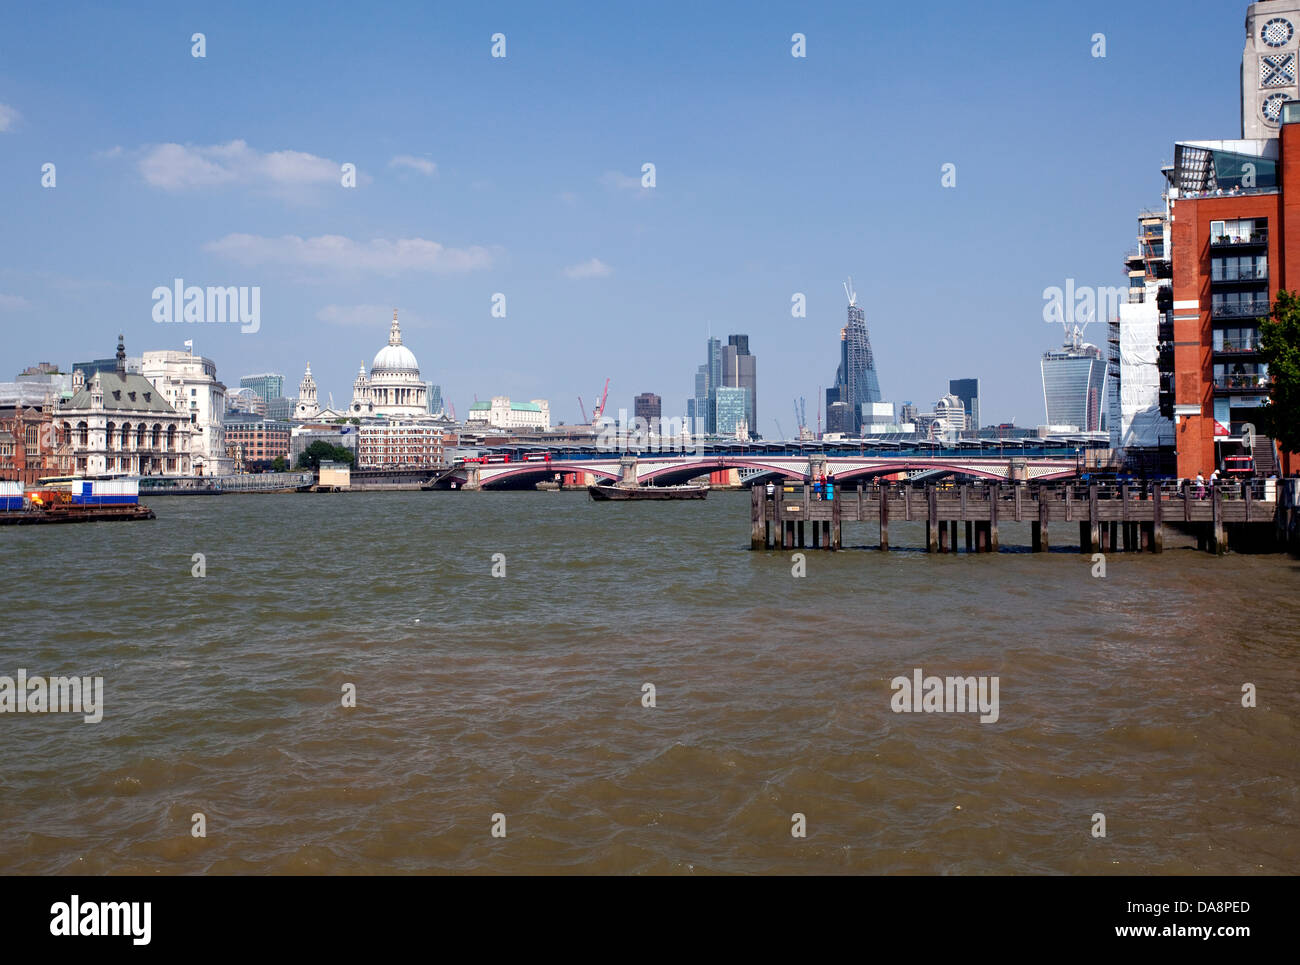 'Cheesegrater' and 'Walkie Talkie' join City of London skyline Stock Photo